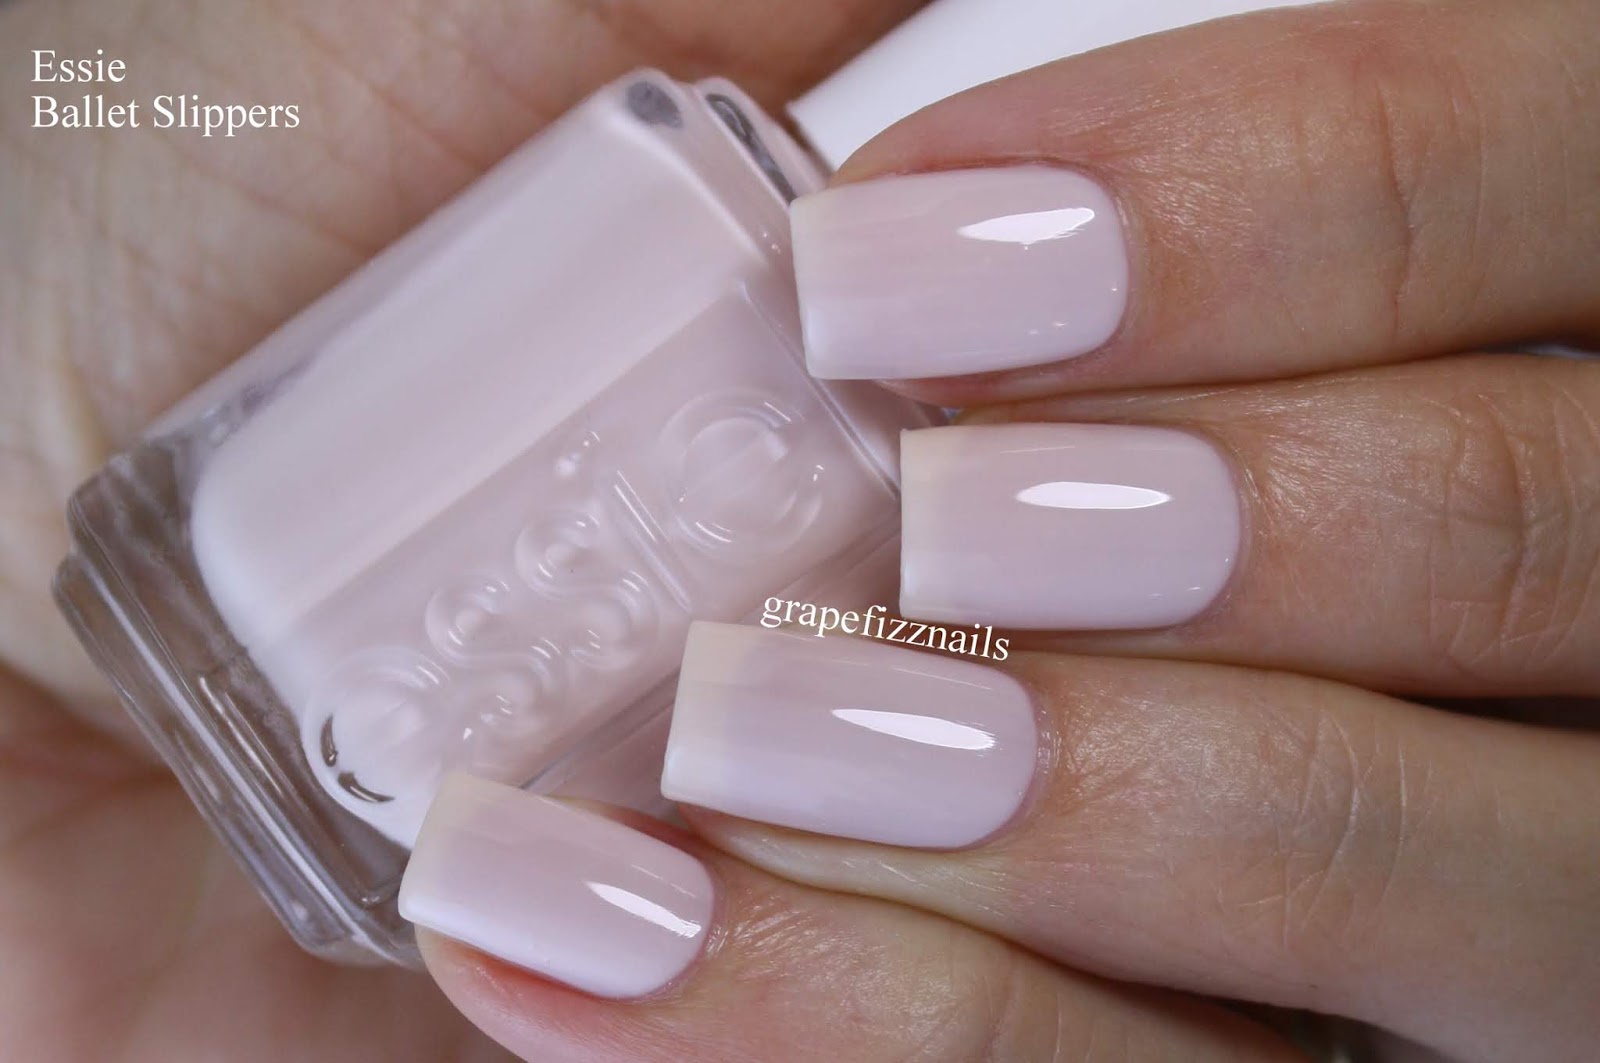 Essie Nail Polish in "Ballet Slippers" - wide 7